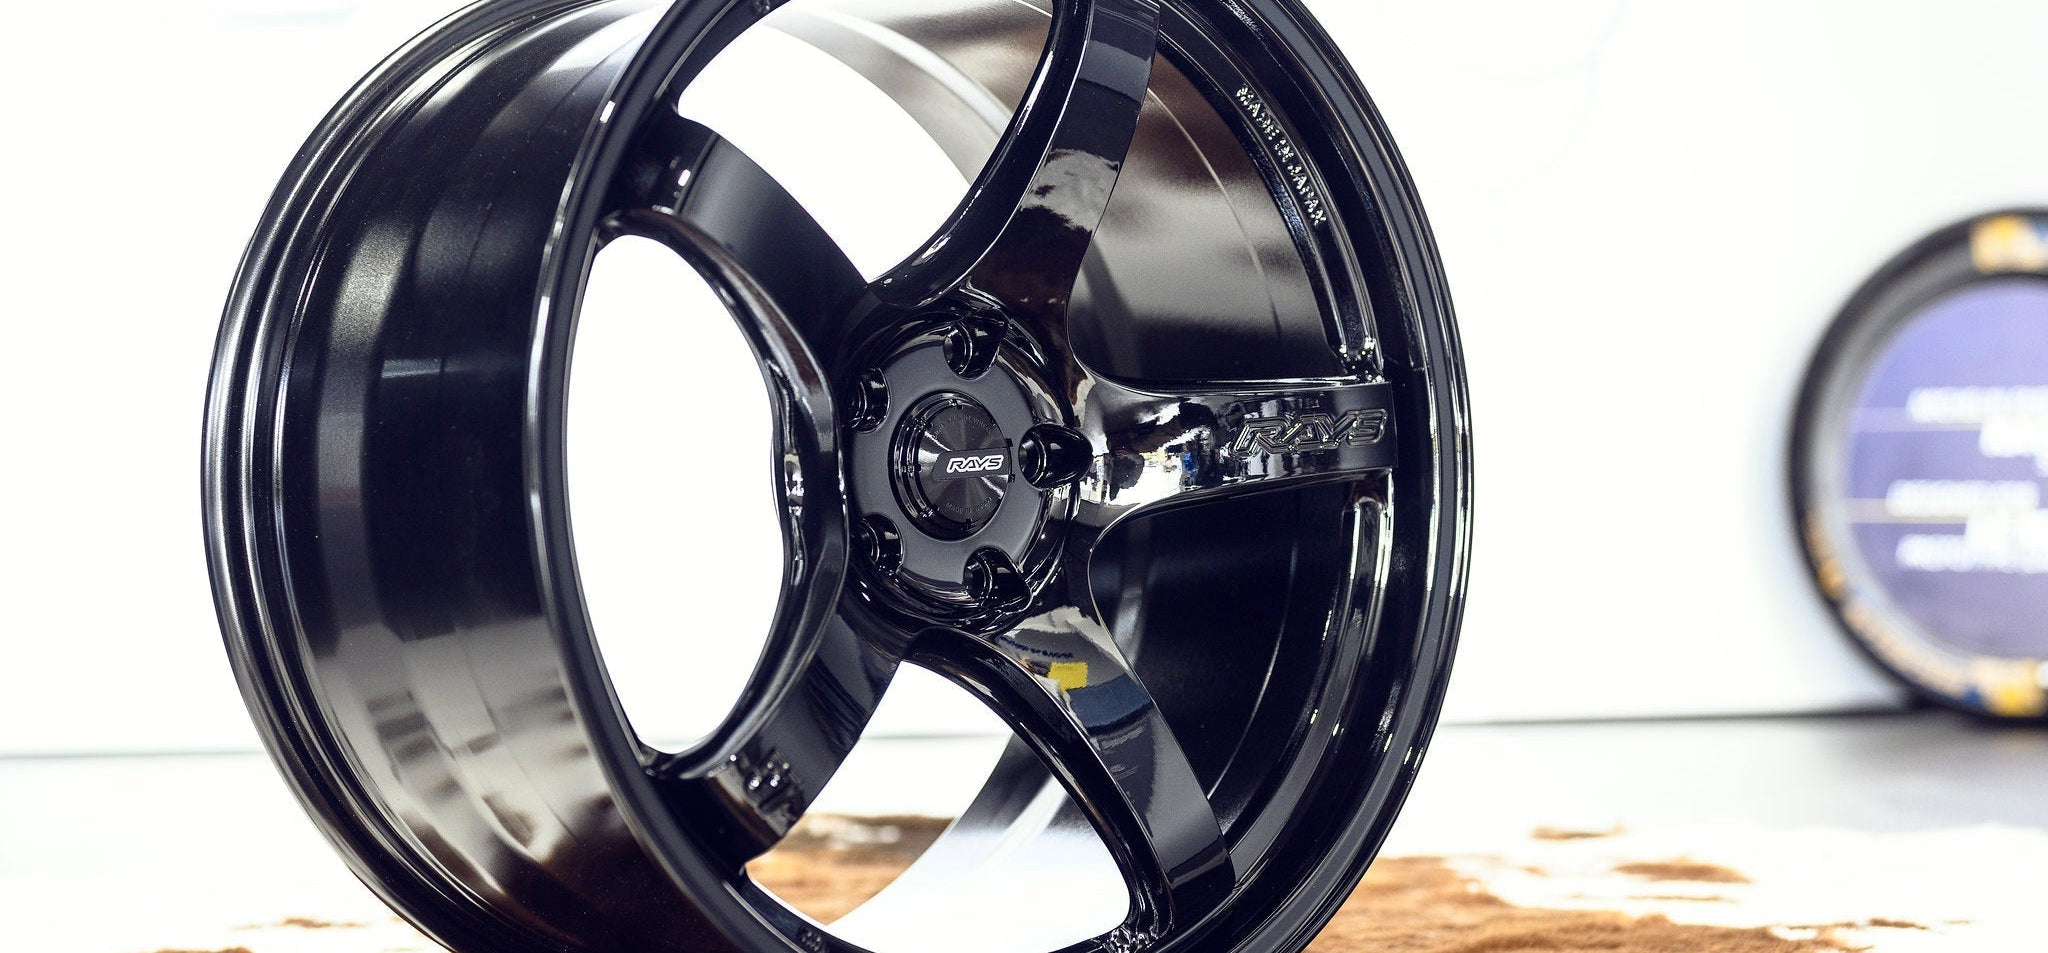 gramLIGHTS 57CR 18" - Premium Wheels from Gram Lights - From just $2390.00! Shop now at MK MOTORSPORTS